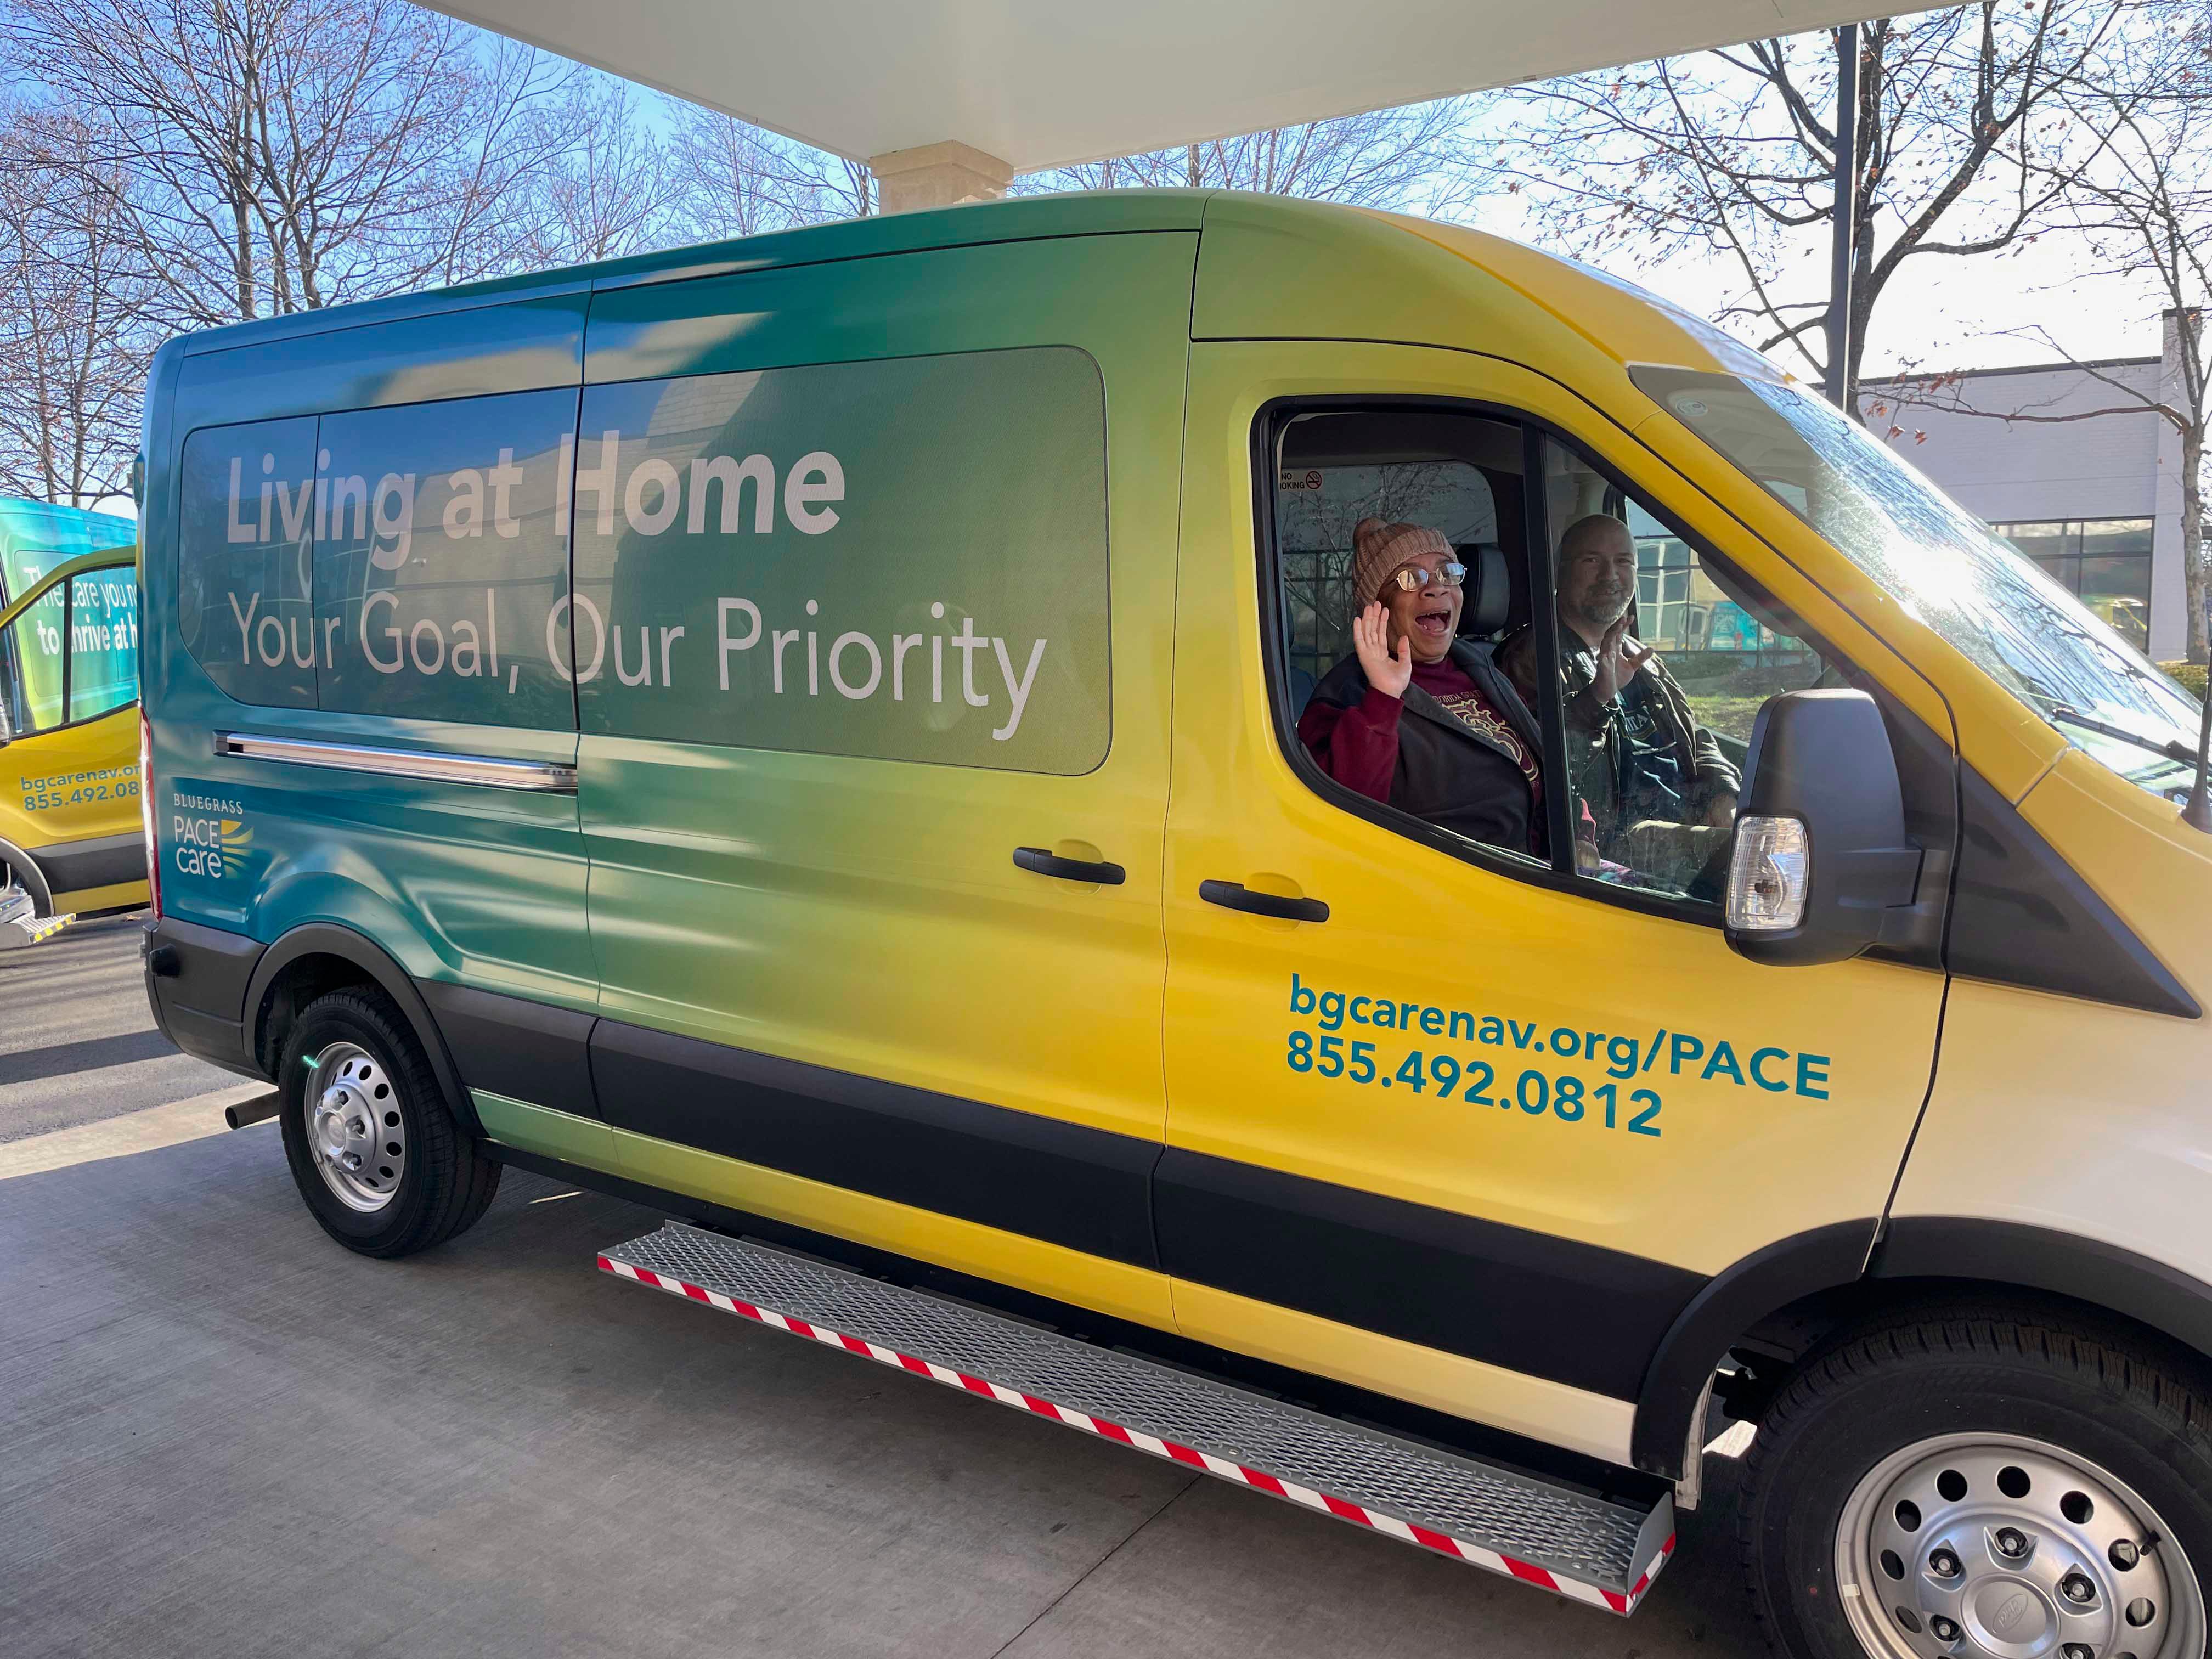 Bluegrass PACE Care provided care at the Bluegrass PACE Center, with transportation to and from the Center and all authorized medical appointments.